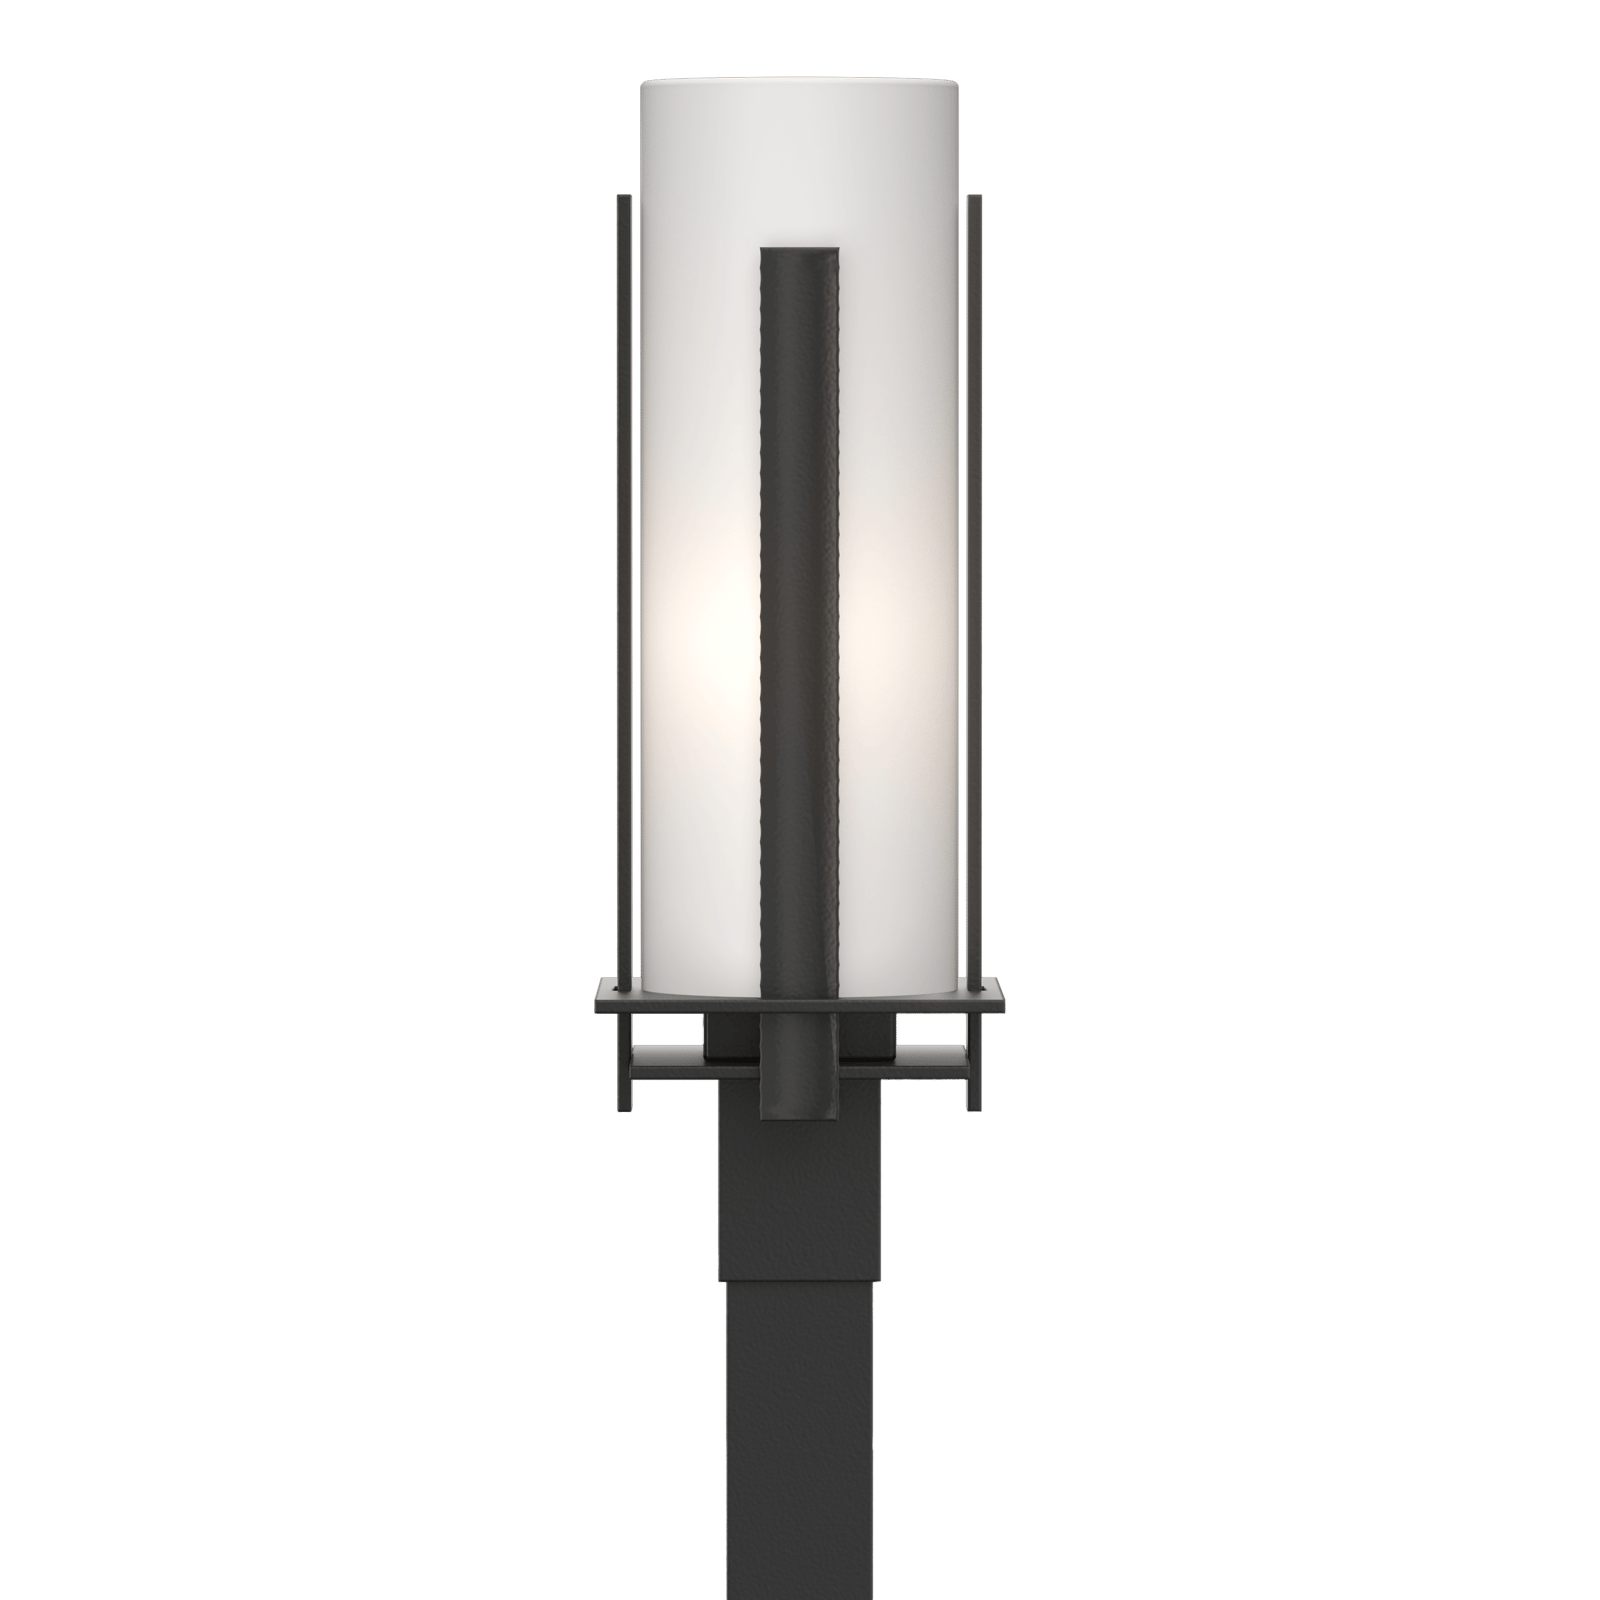 Hubbardton Forge Forged Vertical Bars Outdoor Post Light Outdoor l Post/Pier Mounts Hubbardton Forge Coastal Black Opal Glass (GG) 